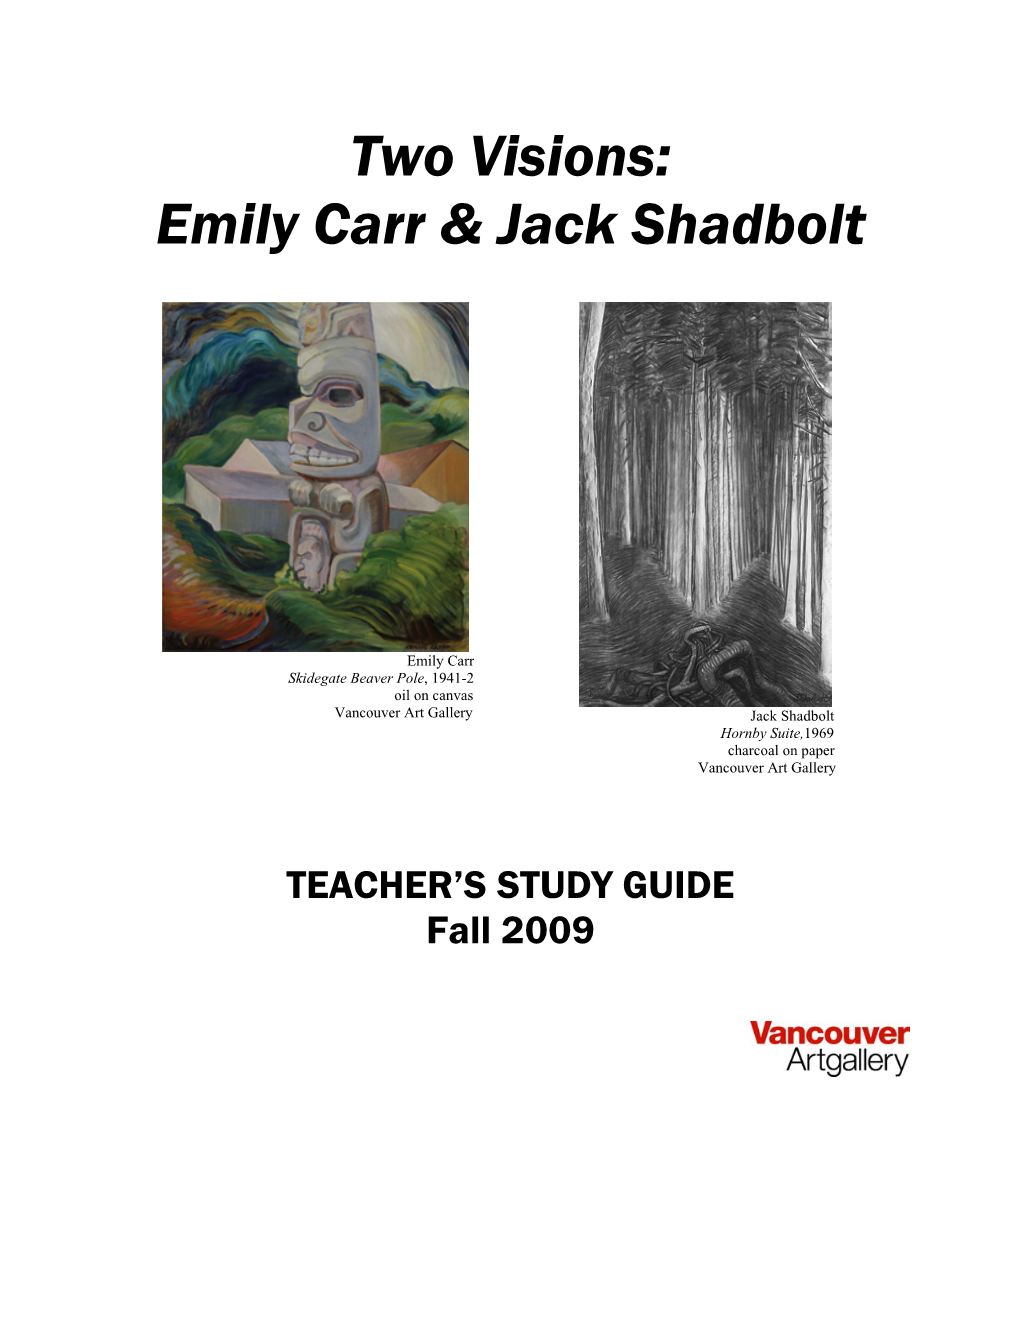 Two Visions: Emily Carr & Jack Shadbolt